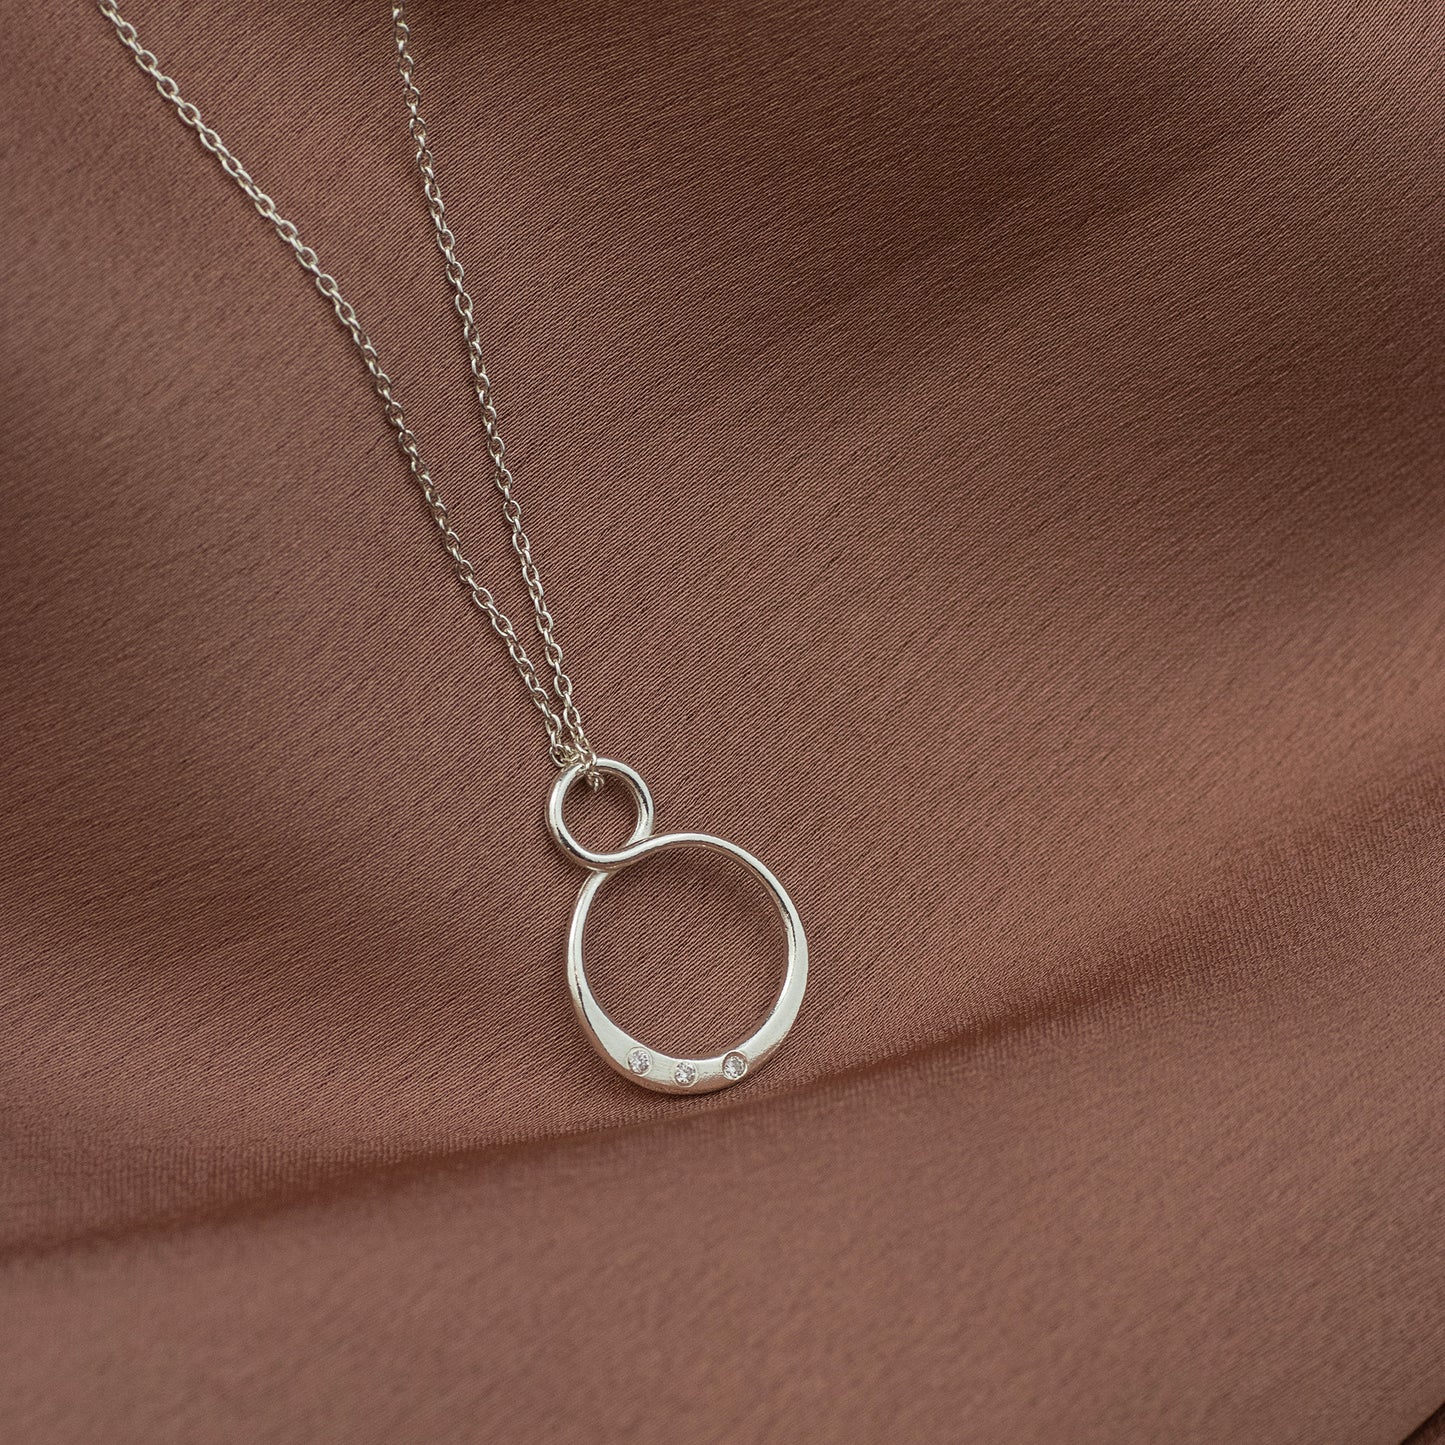 Petite Diamond Infinity Necklace- 3 Diamonds for 3 Loved Ones - Silver